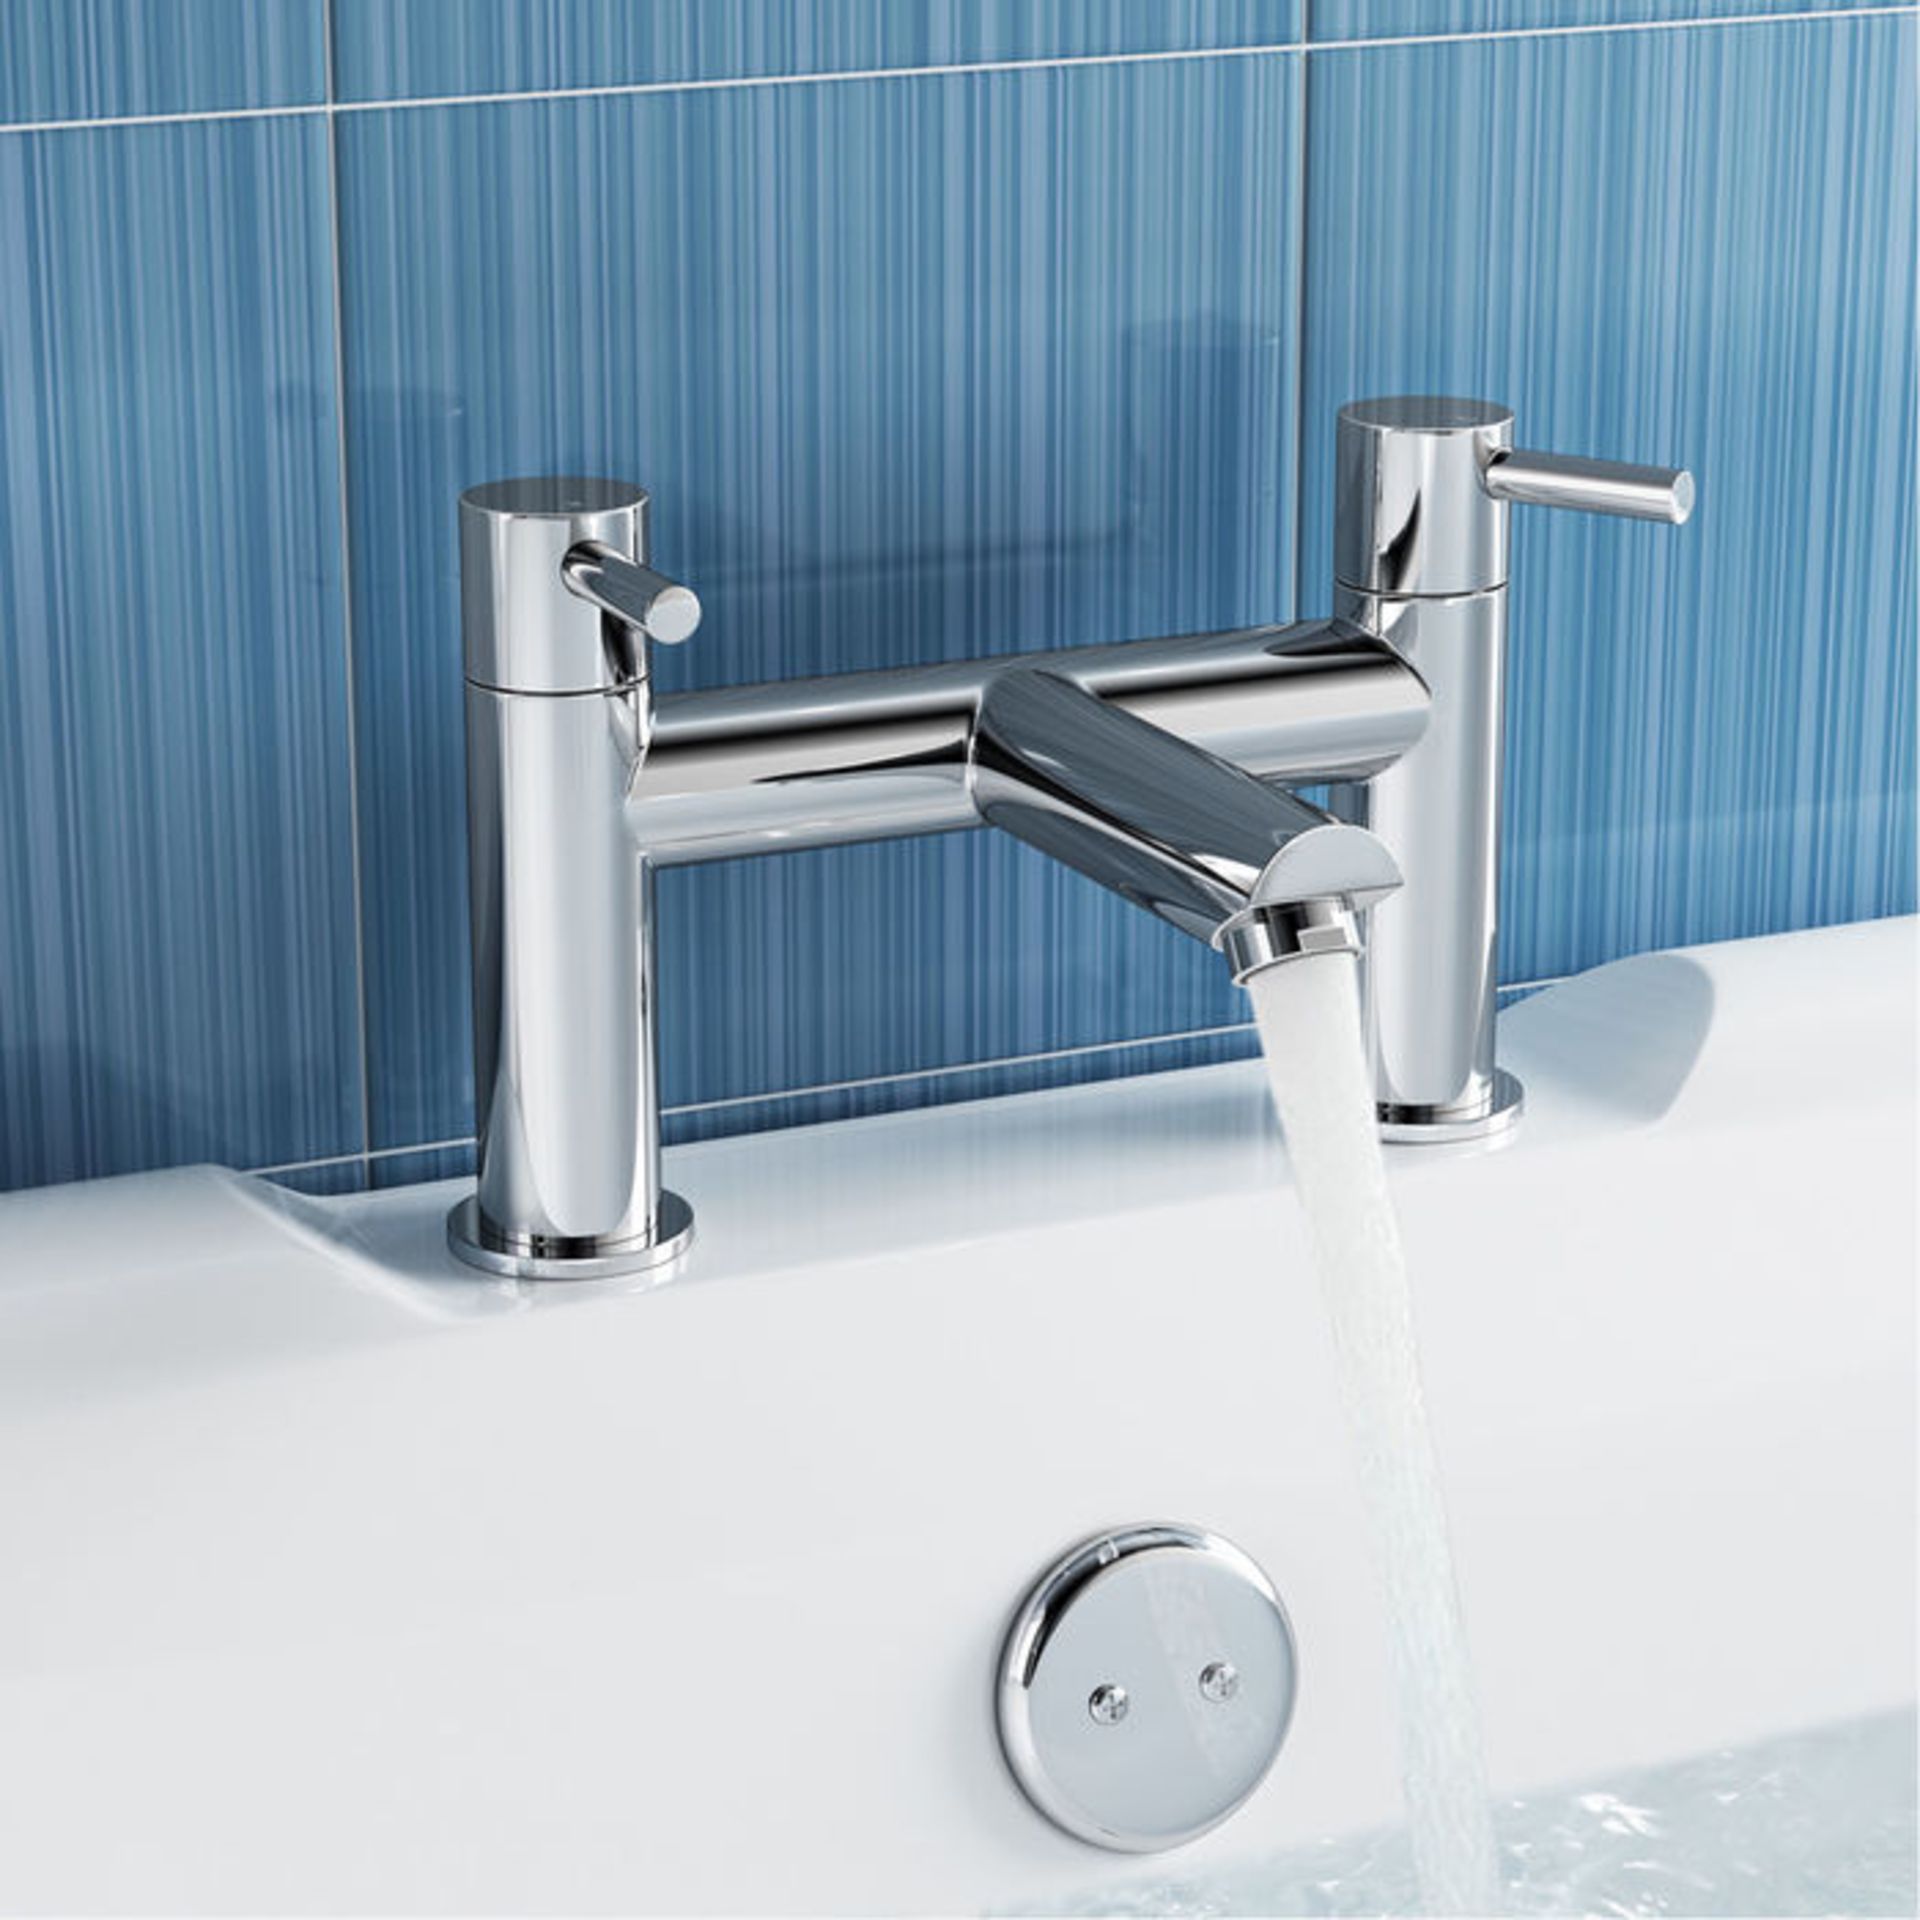 (PA82) Gladstone II Bath Filler Mixer Tap Chrome Plated Solid Brass 1/4 turn solid brass valve